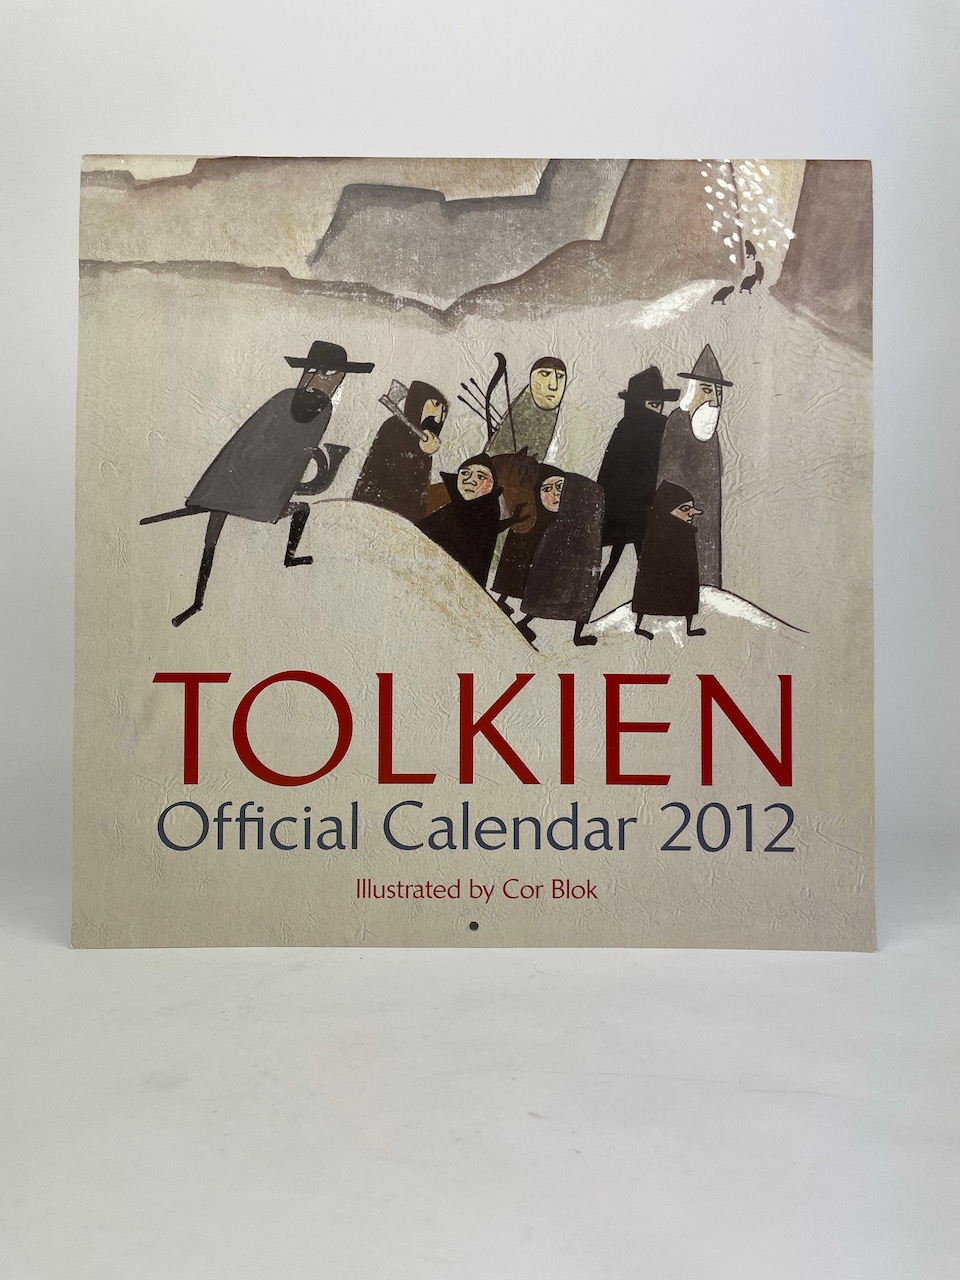 Tolkien Calendar 2012 features 13 paintings by the artist Cor Blok 1